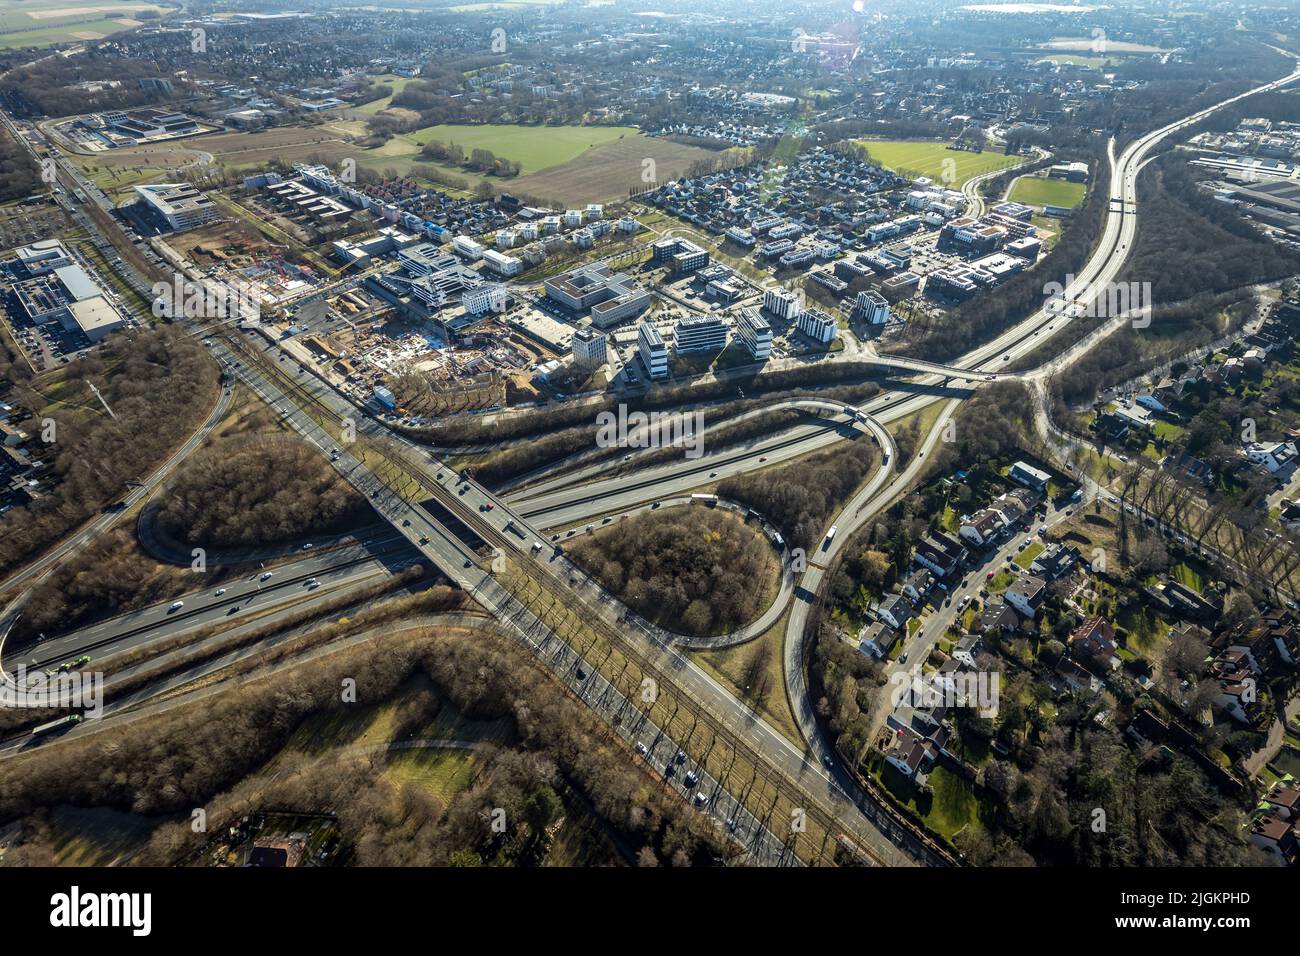 Aerial view, City Crone East, Federal Highway B1, A40 and B236, Dortmund, Ruhr Area, North Rhine-Westphalia, Germany, Europe, DE, aerial photograph, b Stock Photo